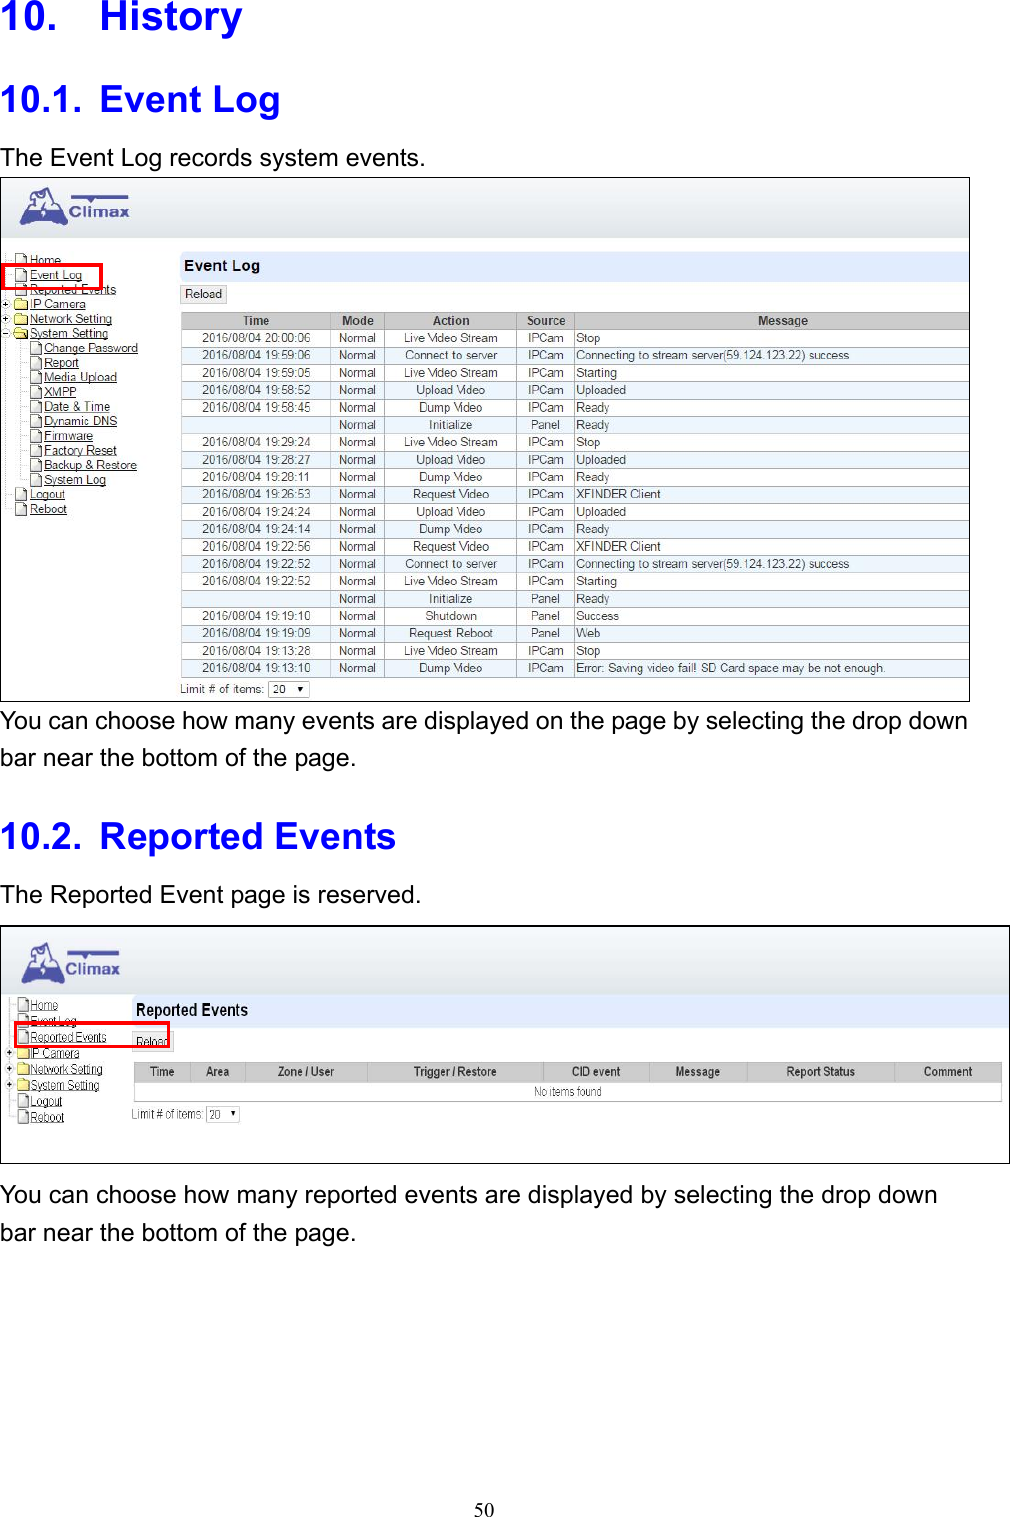 50  10.  History 10.1.  Event Log The Event Log records system events.  You can choose how many events are displayed on the page by selecting the drop down bar near the bottom of the page. 10.2.  Reported Events The Reported Event page is reserved.  You can choose how many reported events are displayed by selecting the drop down bar near the bottom of the page.       